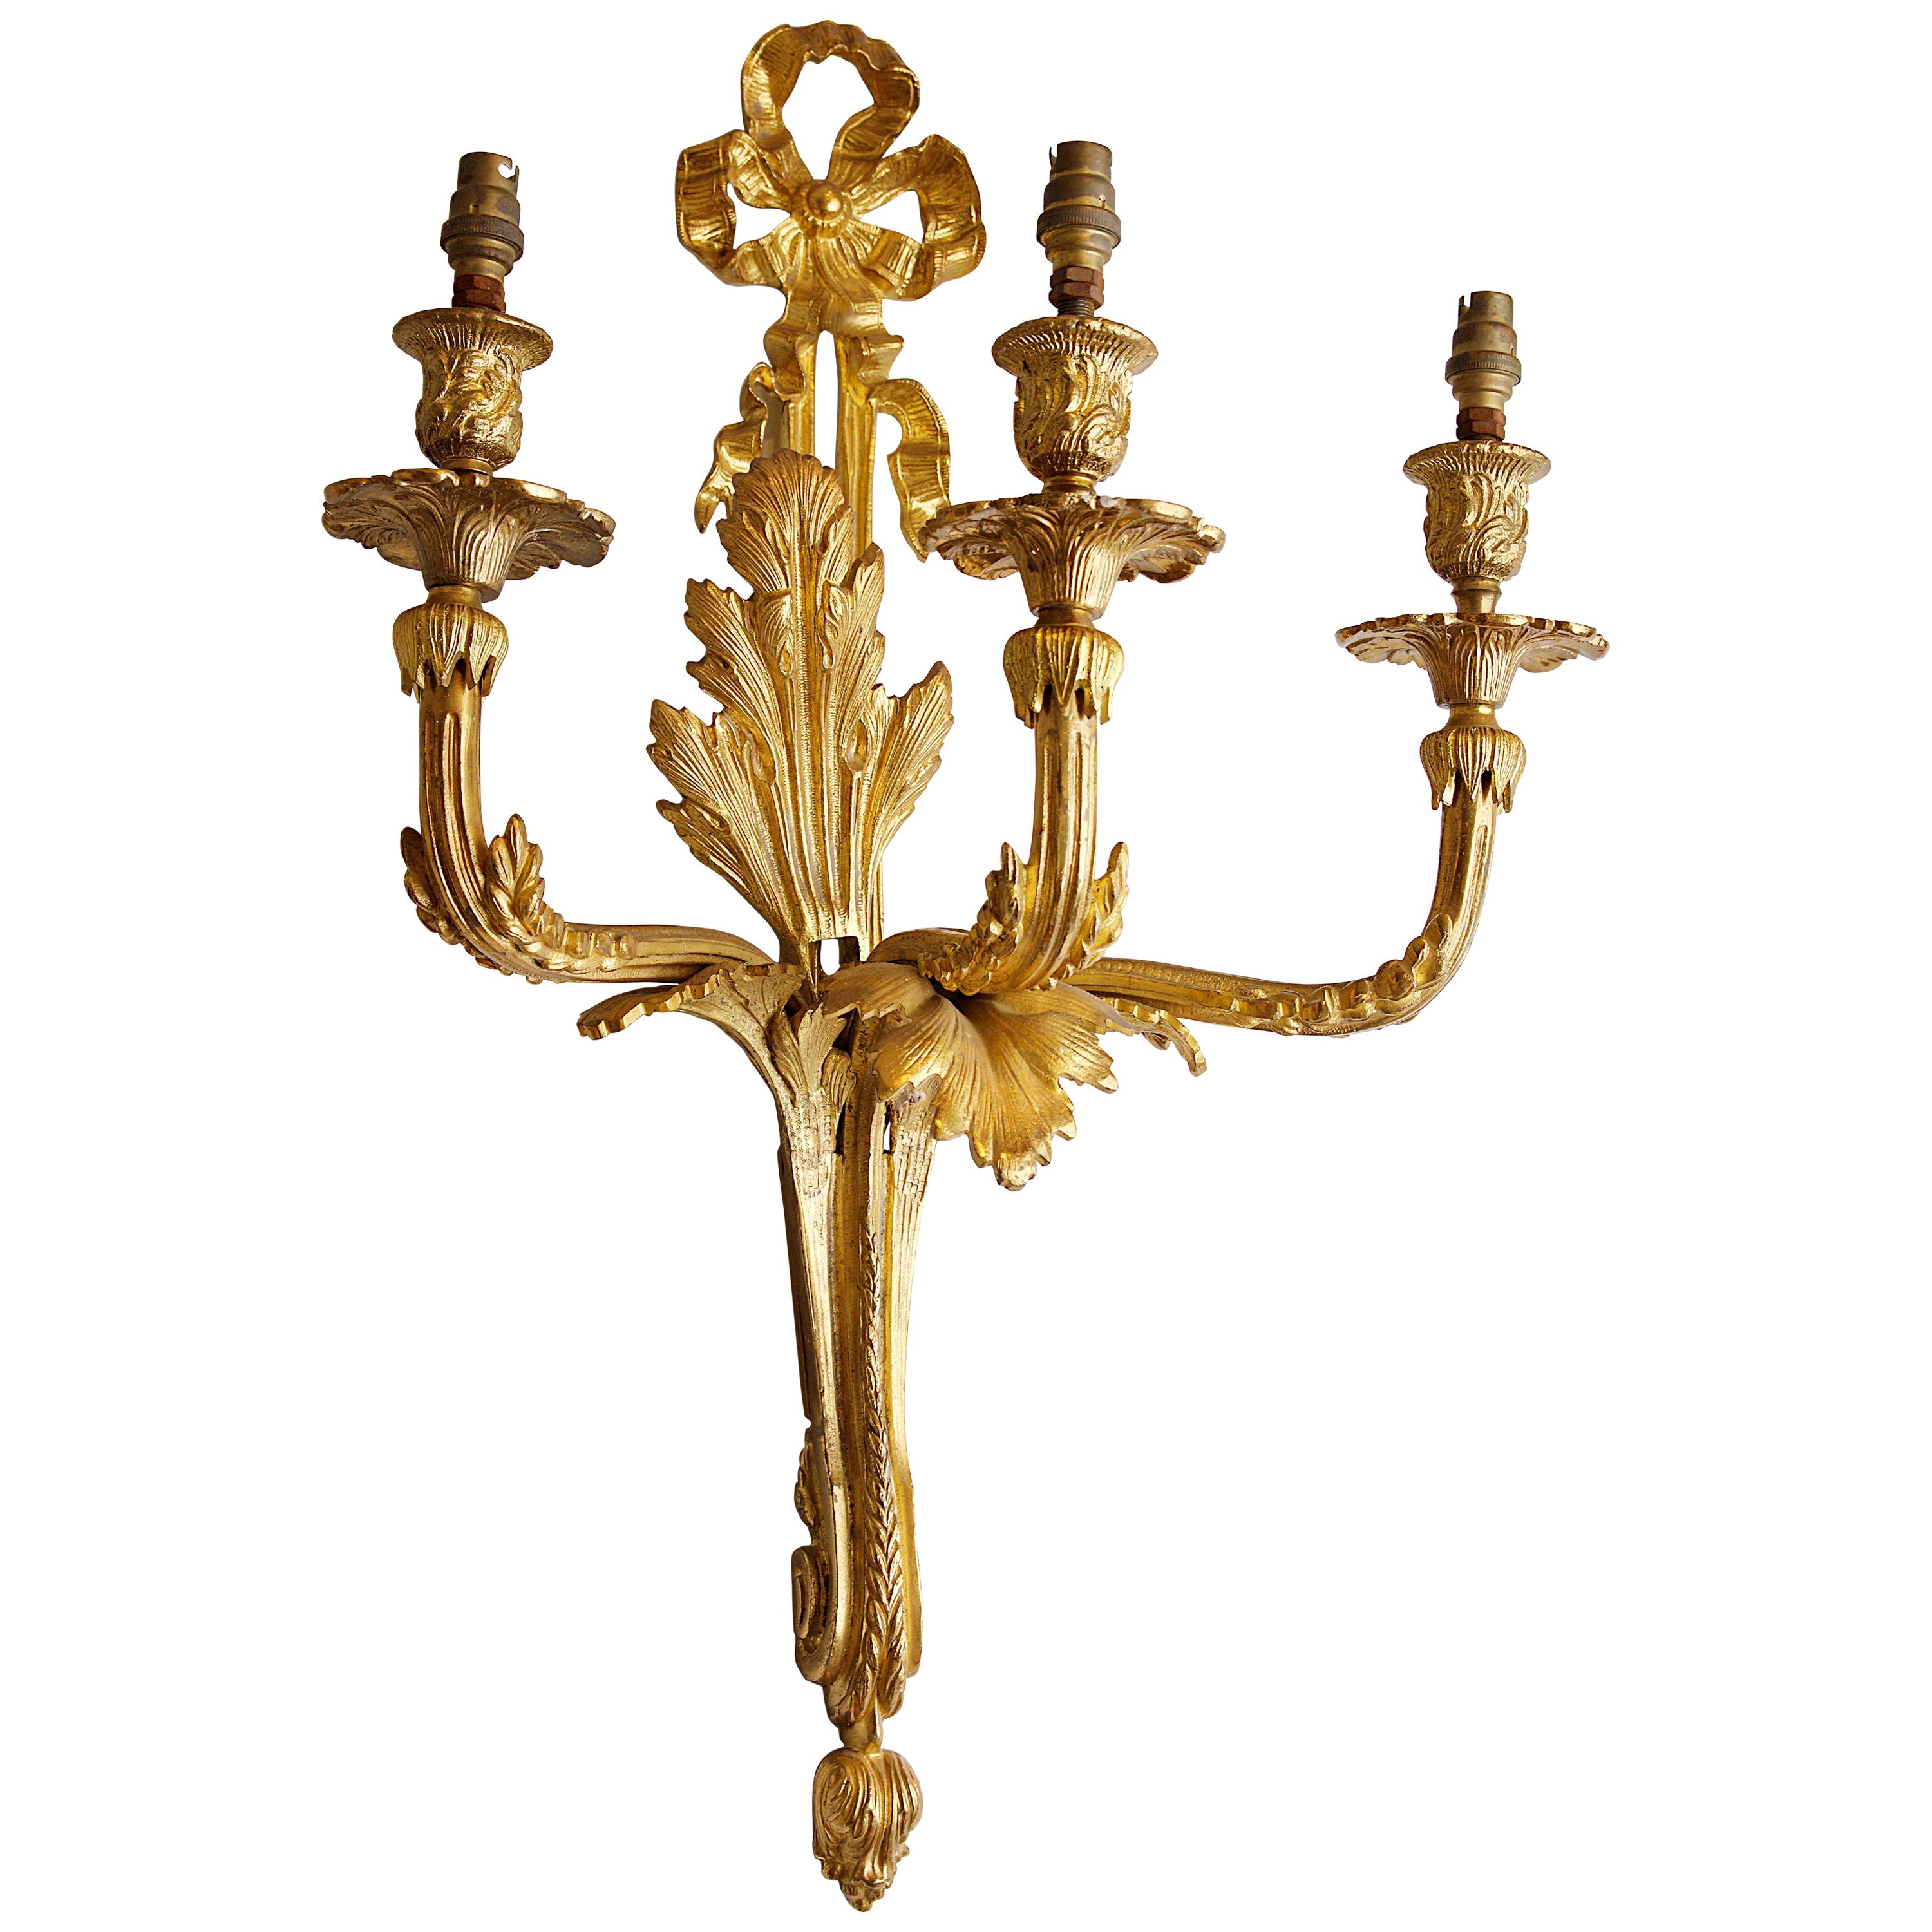 Pair of Mid-20th Century English Ormolu Wall-Mounted Candelabra For Sale